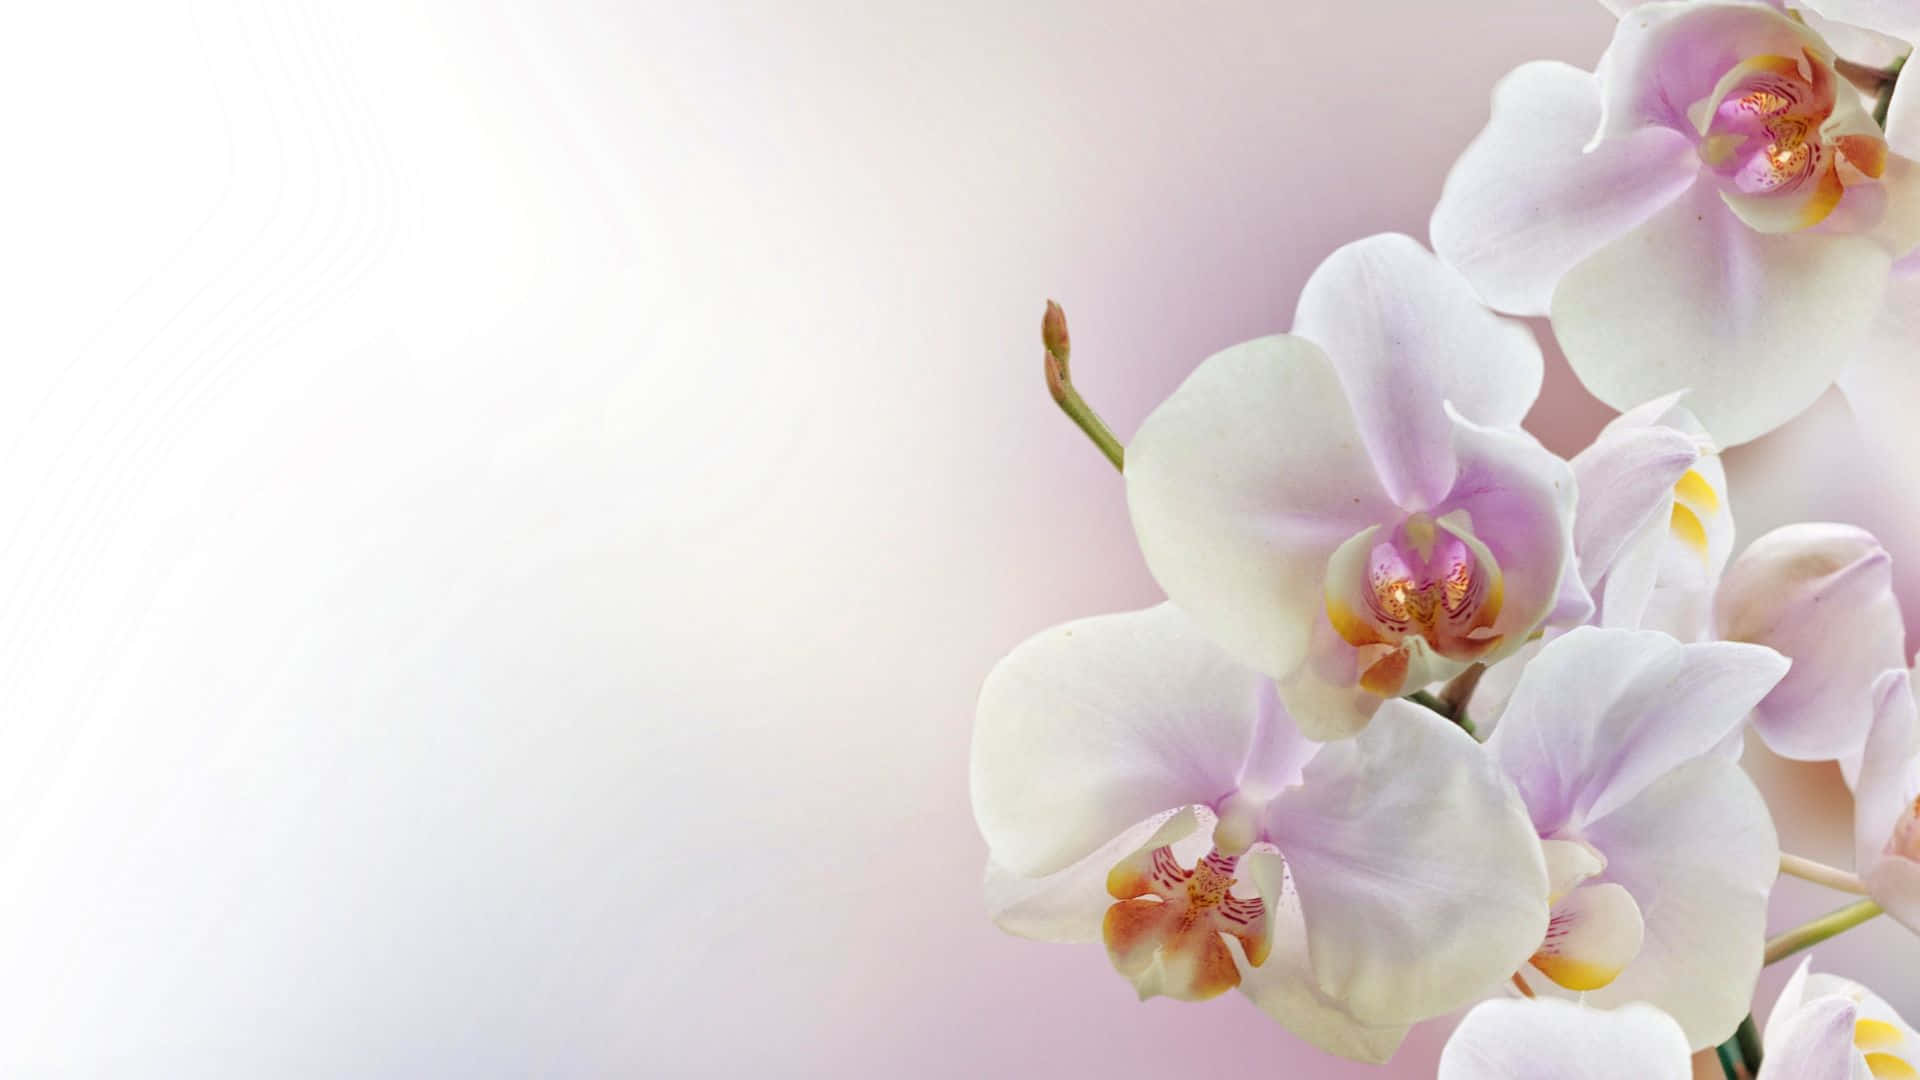 Get lost in the beauty of these exquisite white Orchids!